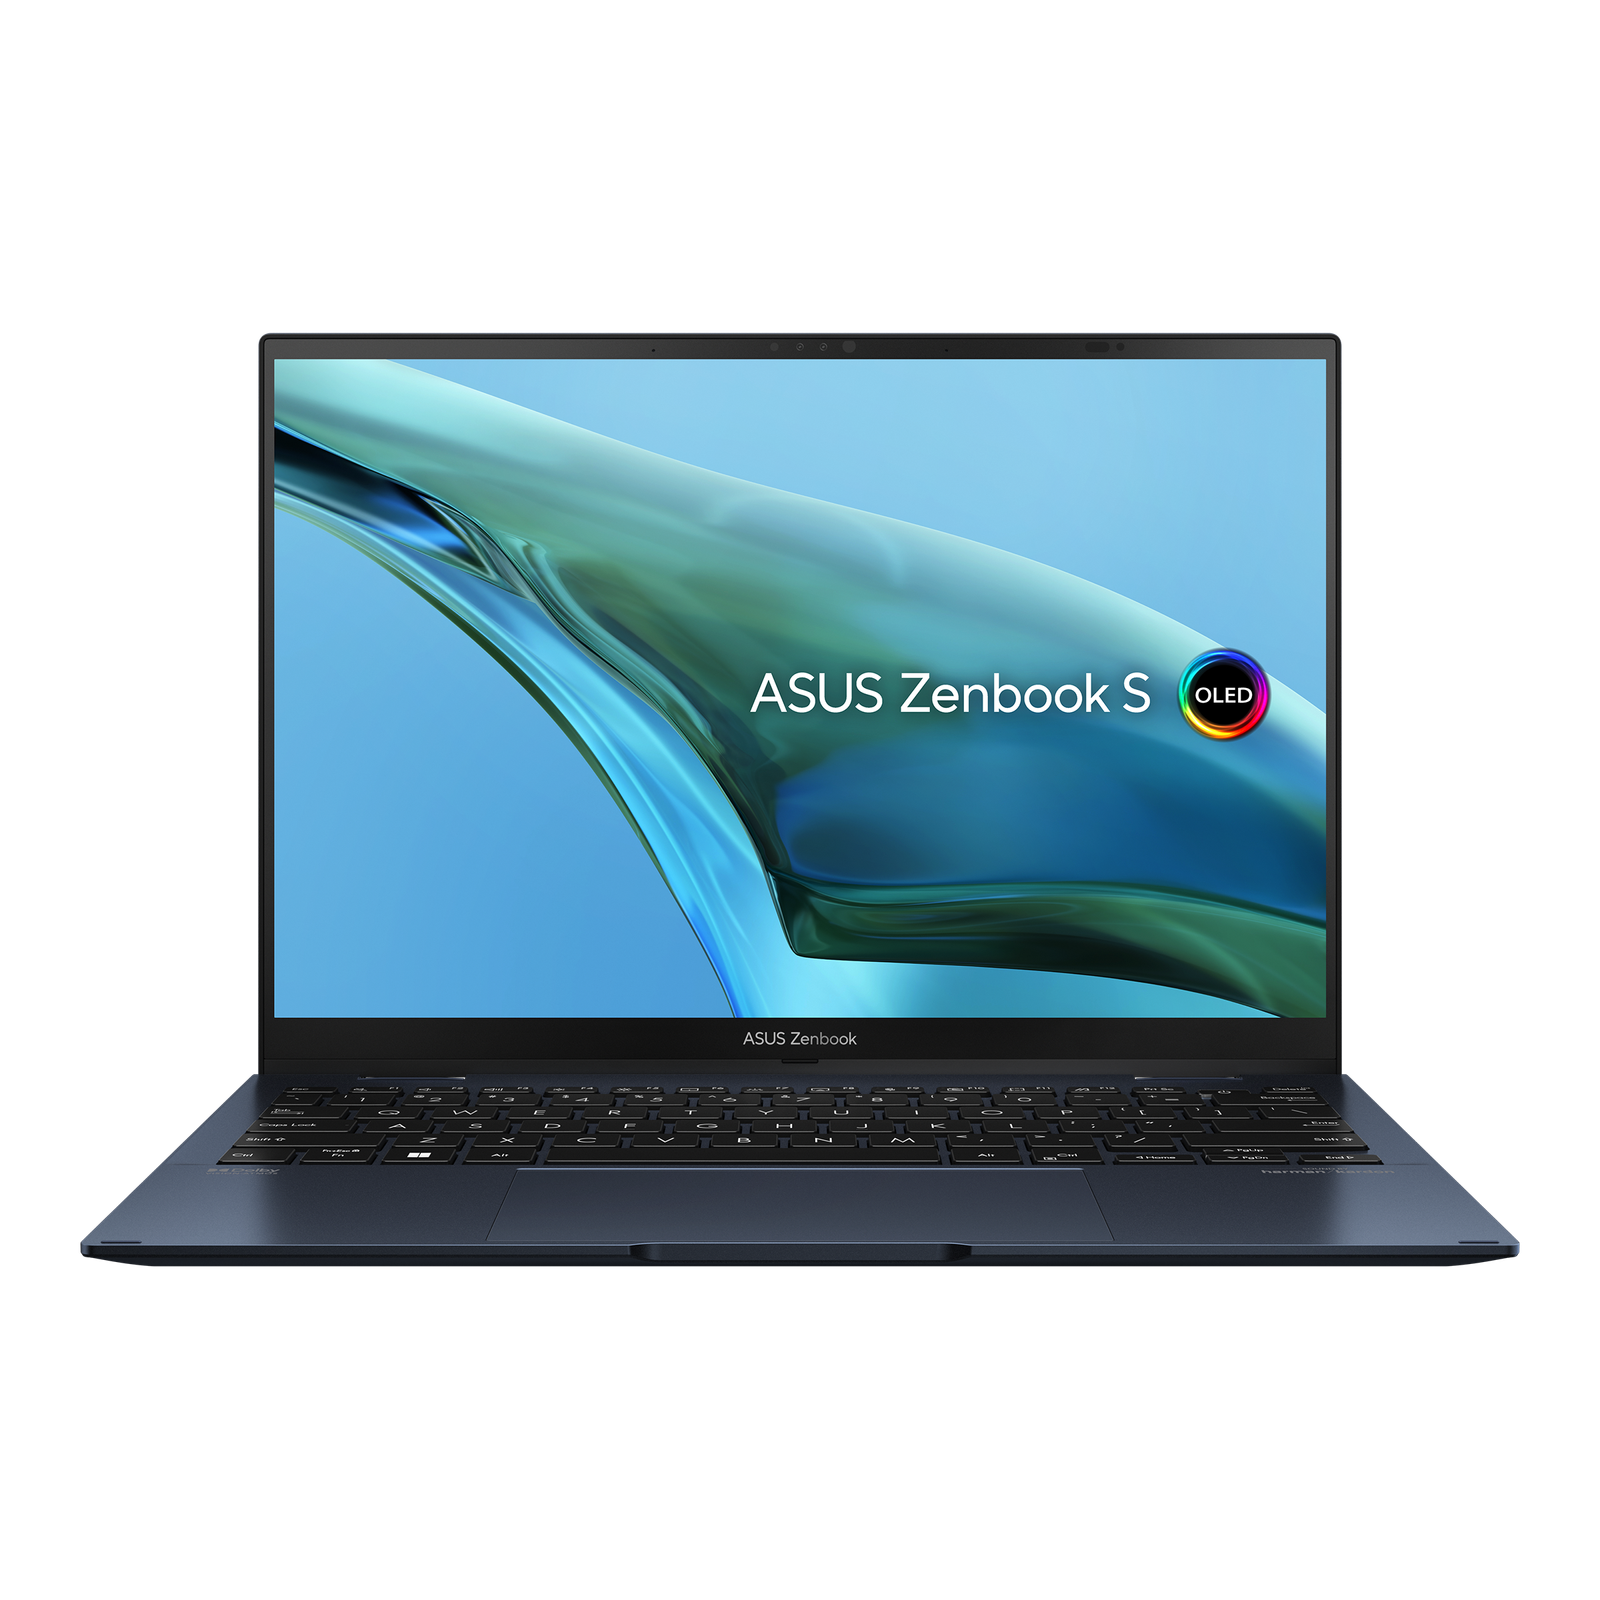 ASUS Zenbook S 13 OLED the Worlds Slimmest OLED Laptop debuts in India